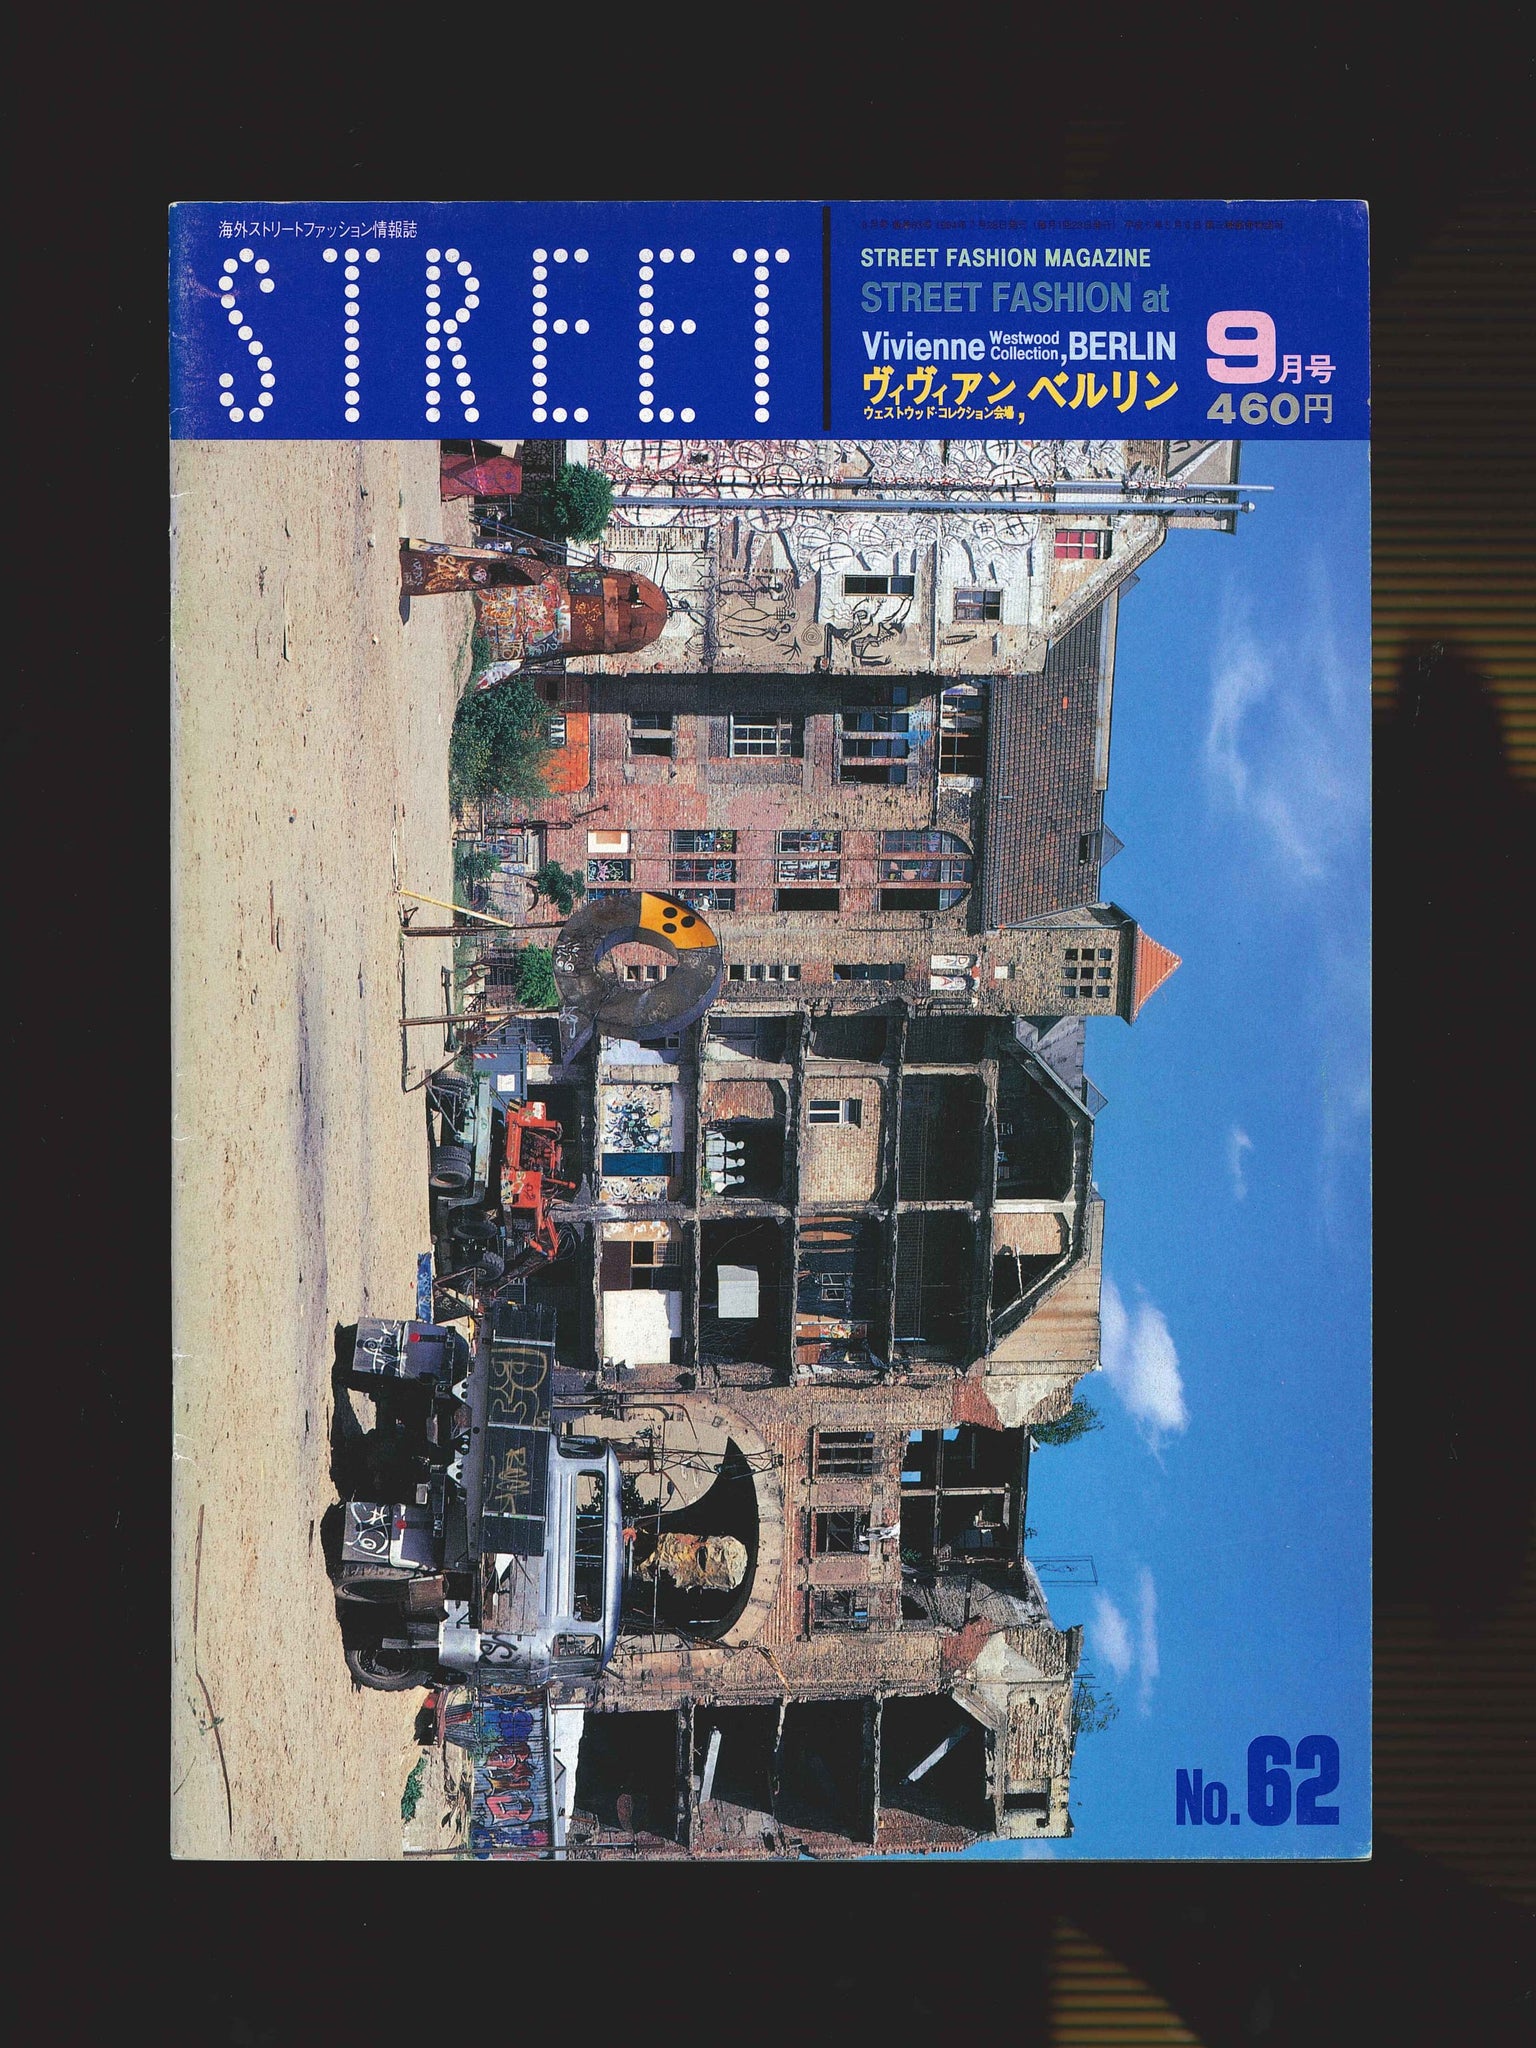 STREET magazine no. 62 / sept 1994 / vivienne westwood collections and berlin